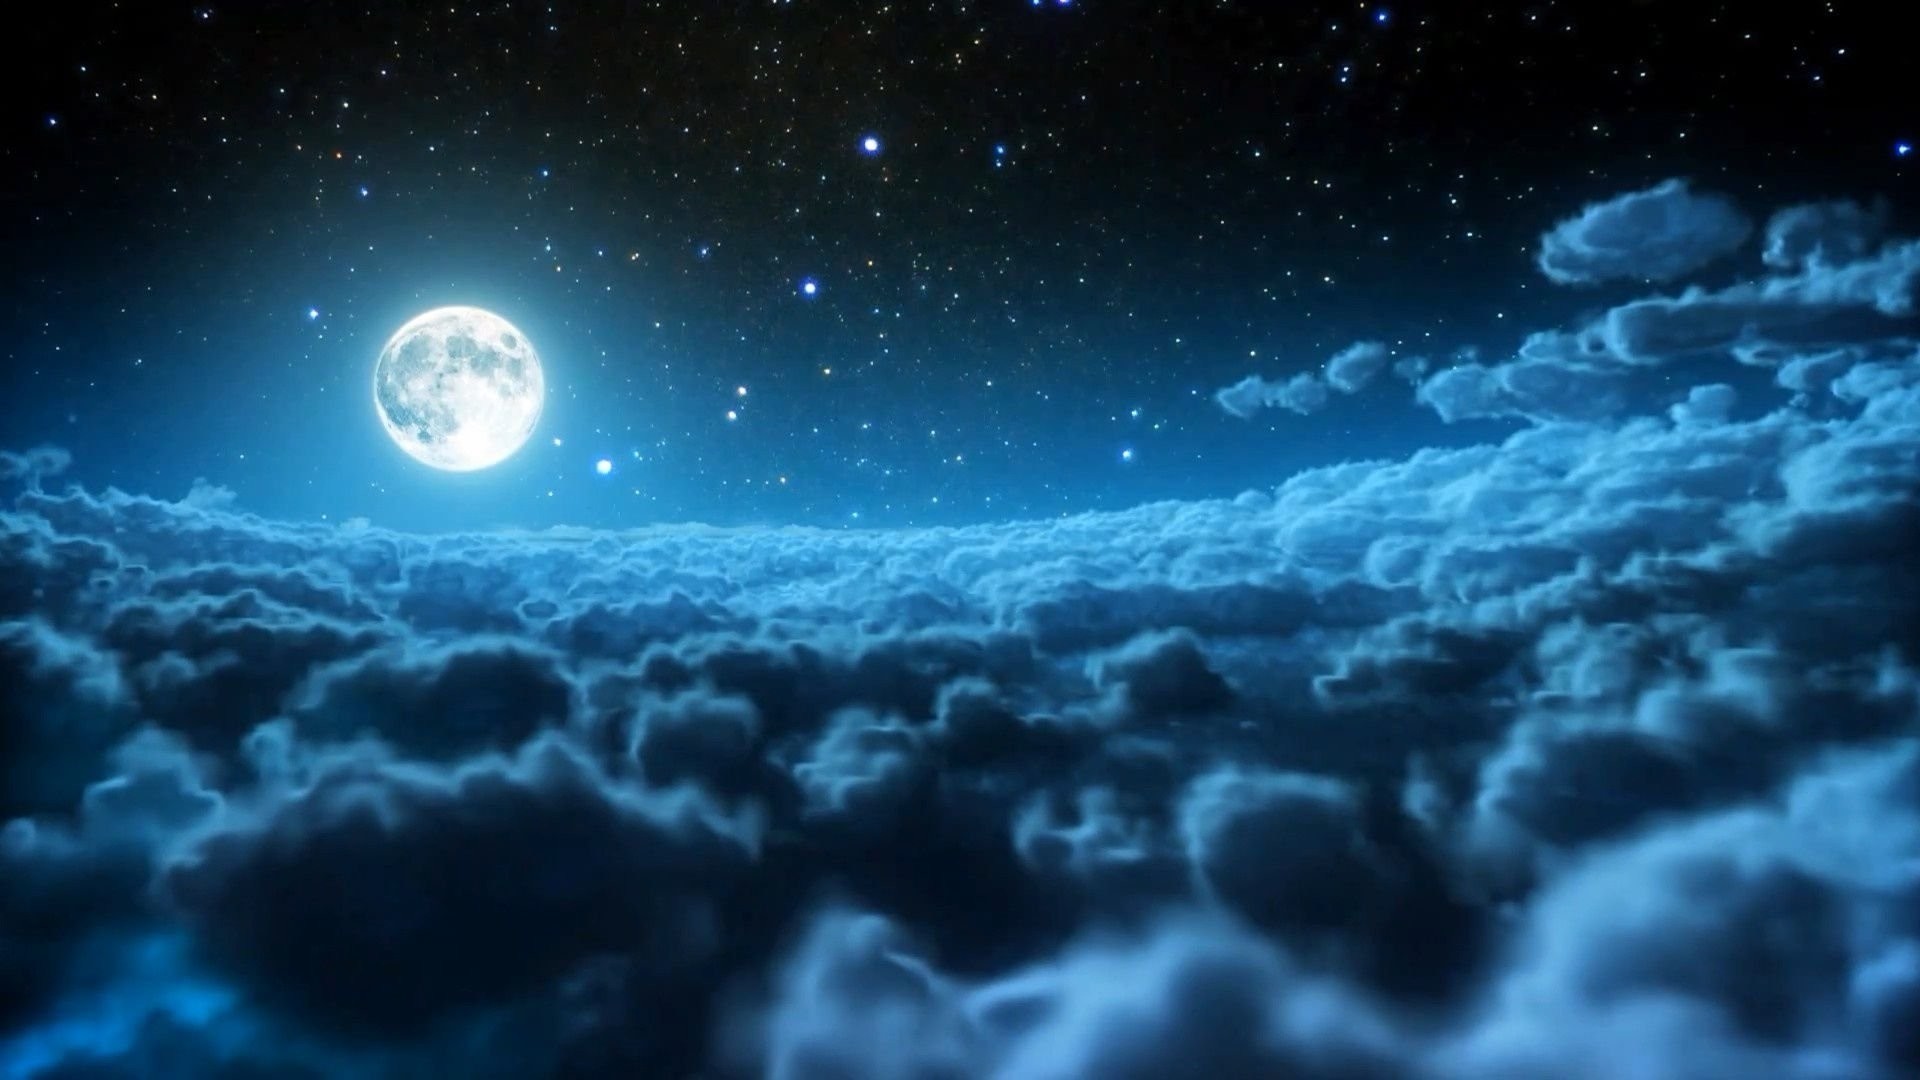 1920x1080 Title : quality moon wallpaper – full hd wallpapers – download free.  Dimension : 1920 x 1080. File Type : JPG/JPEG